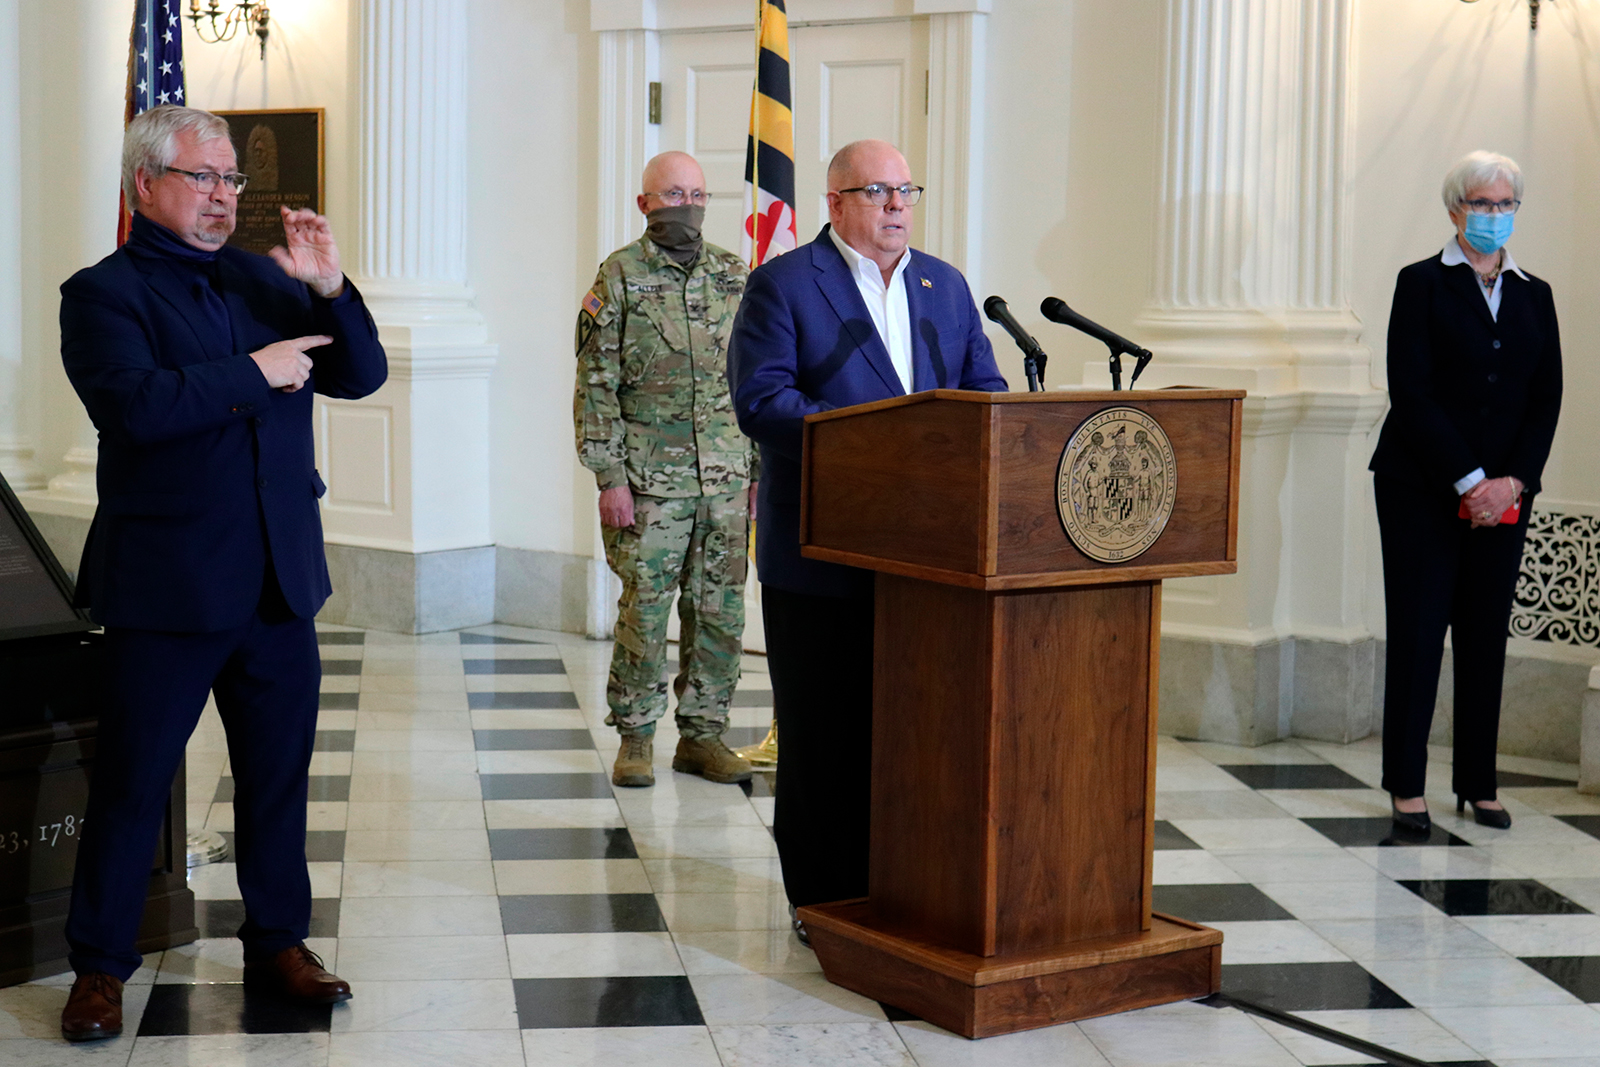 Maryland Gov. Larry Hogan talks at a news conference on April 29, in Annapolis, Maryland.